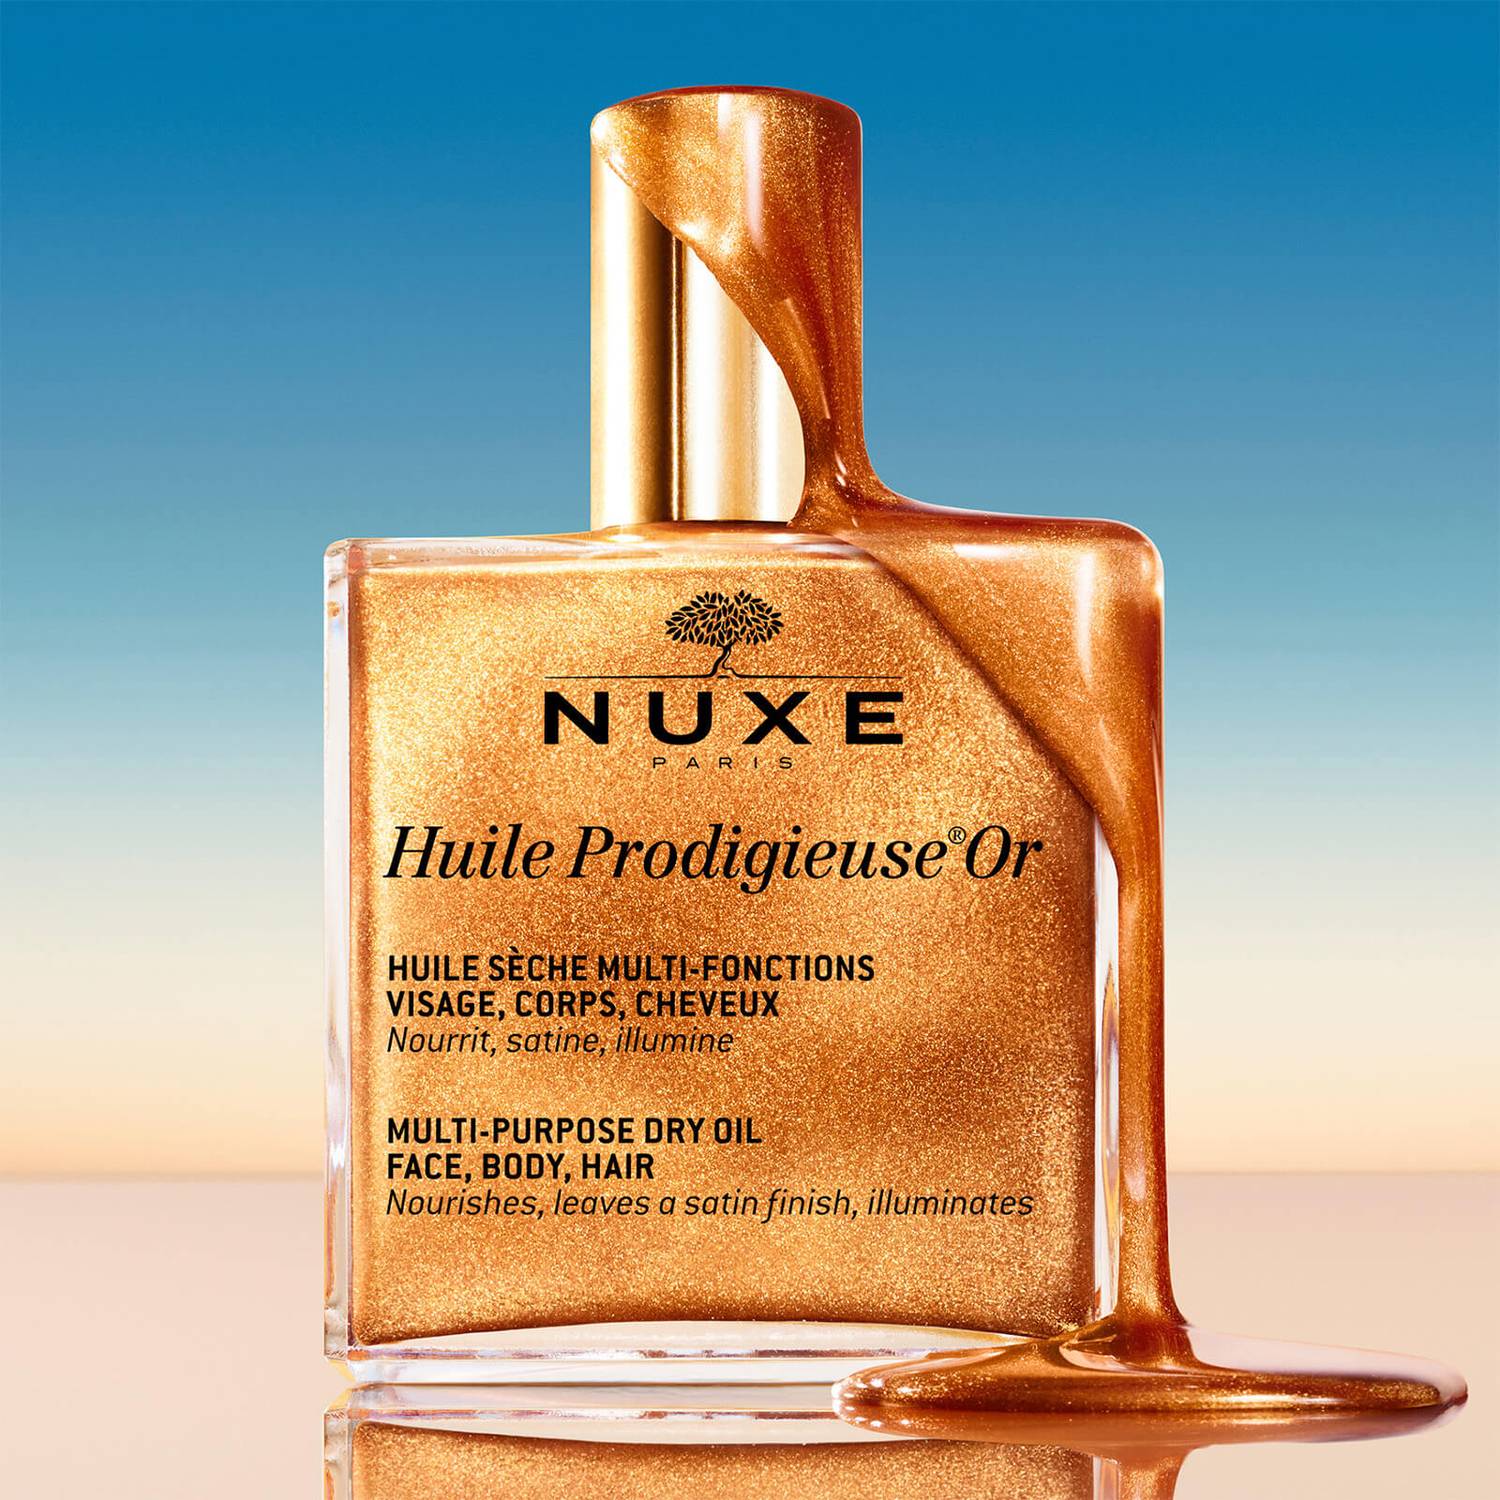 Nuxe Shimmering Dry Oil Huile Prodigieuse is a must have luxurious product.